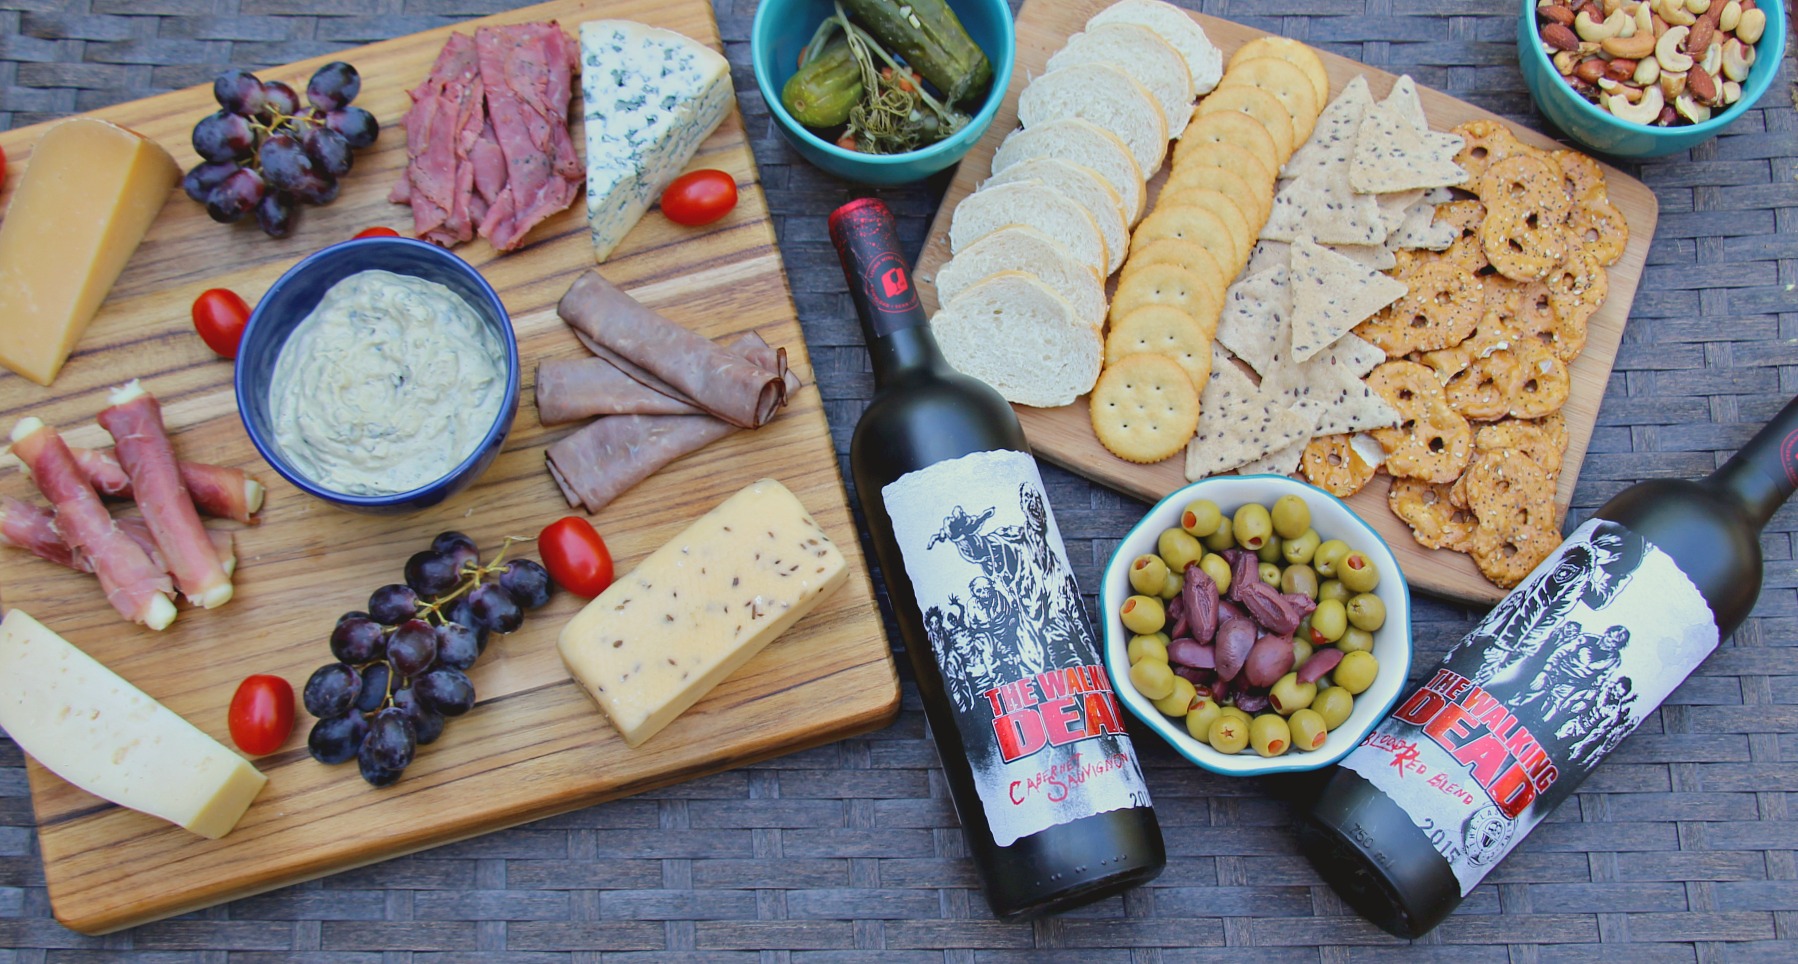 How To Host A Simple Wine & Cheese Party